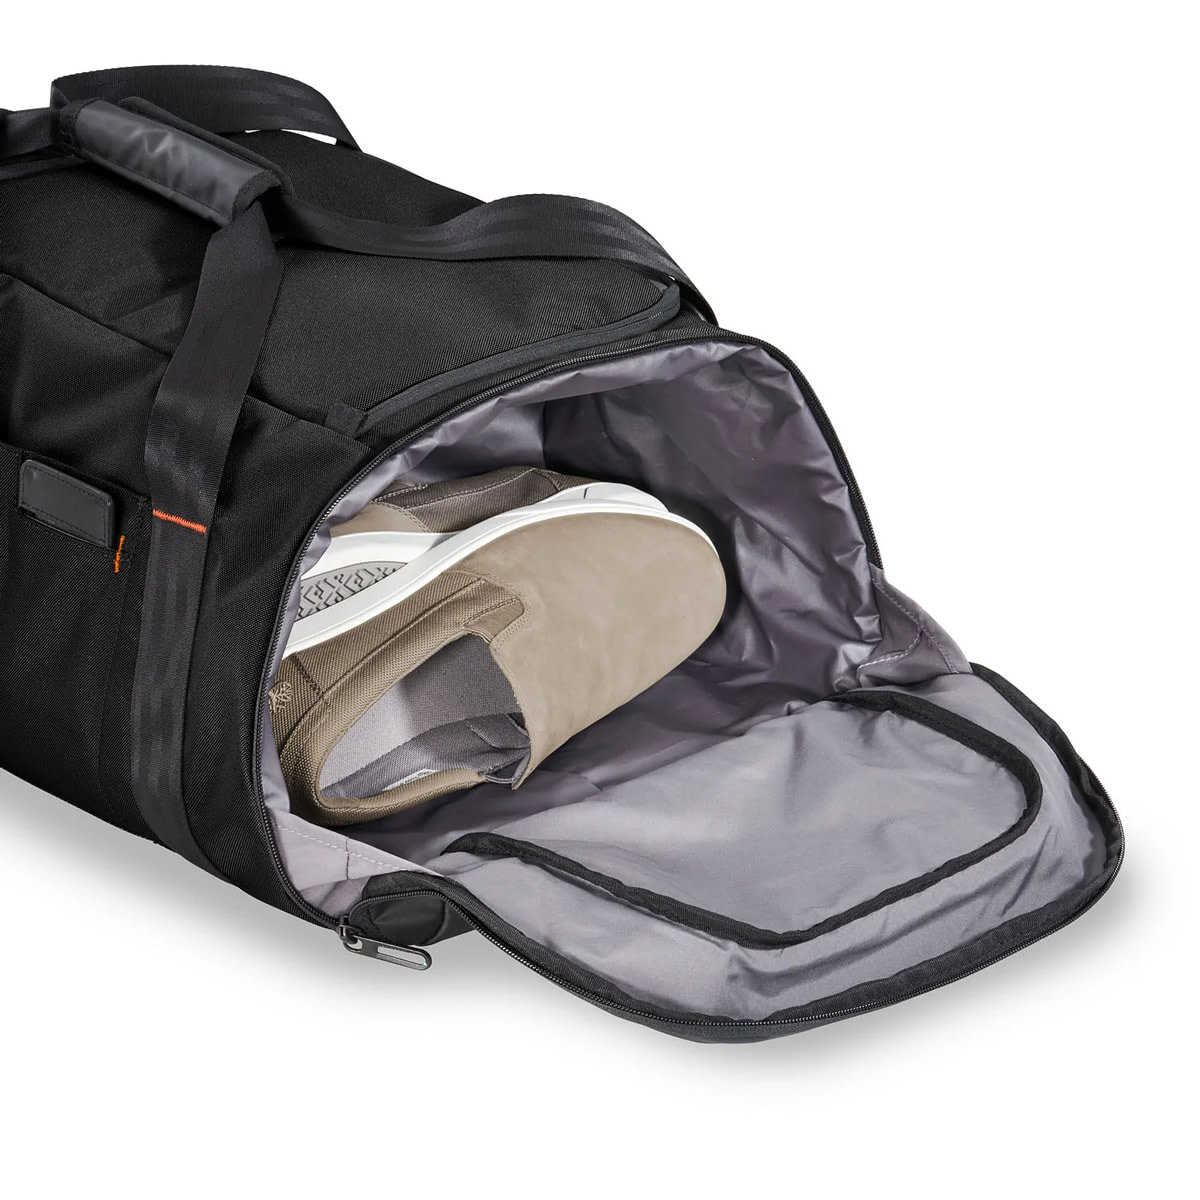 Large weekend bag with shoe compartment